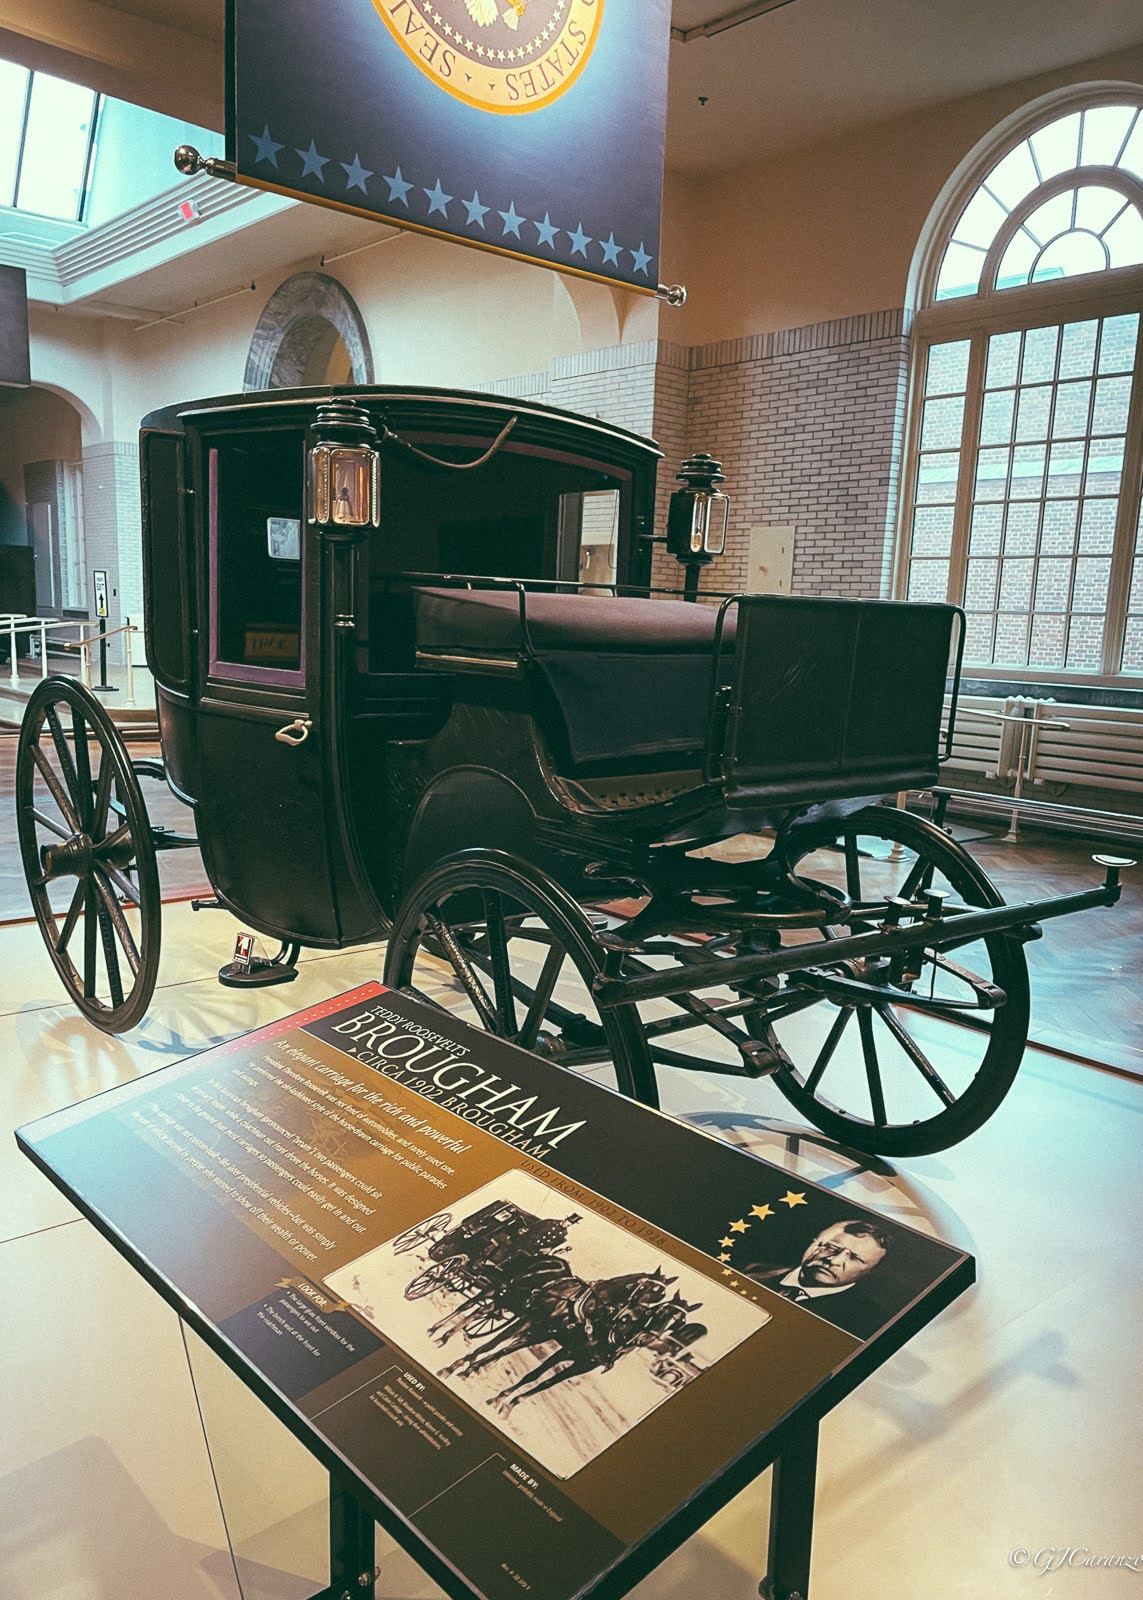 Travel Blog: Canada-US Roadtrip to Home: Visit the Ford Museum at Dearborn, Michigan